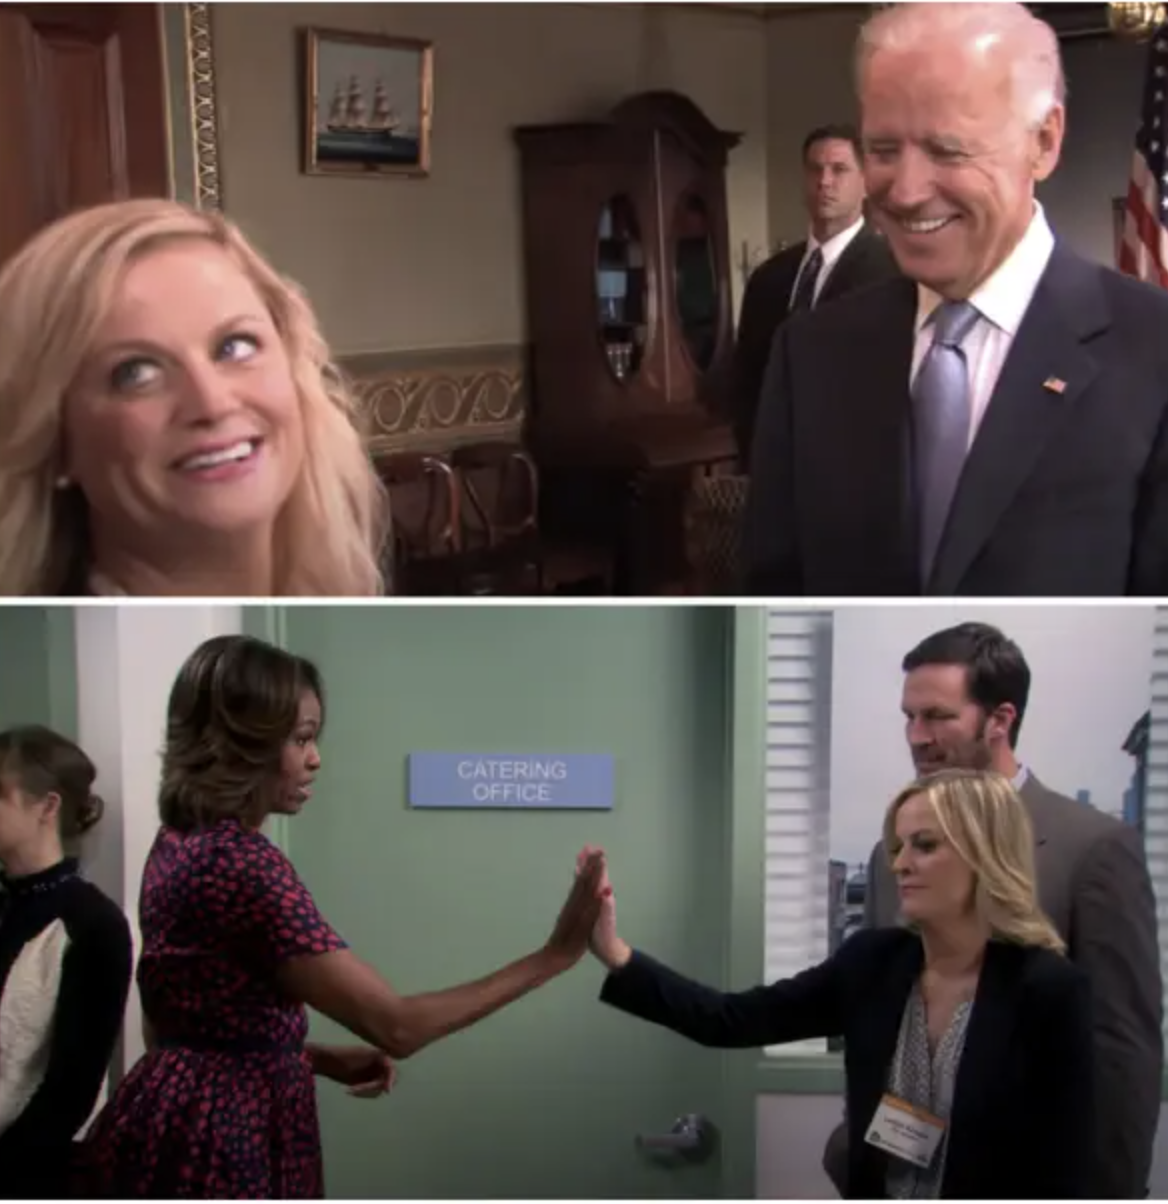 Amy Poehler laughs with Biden and high fives Obama